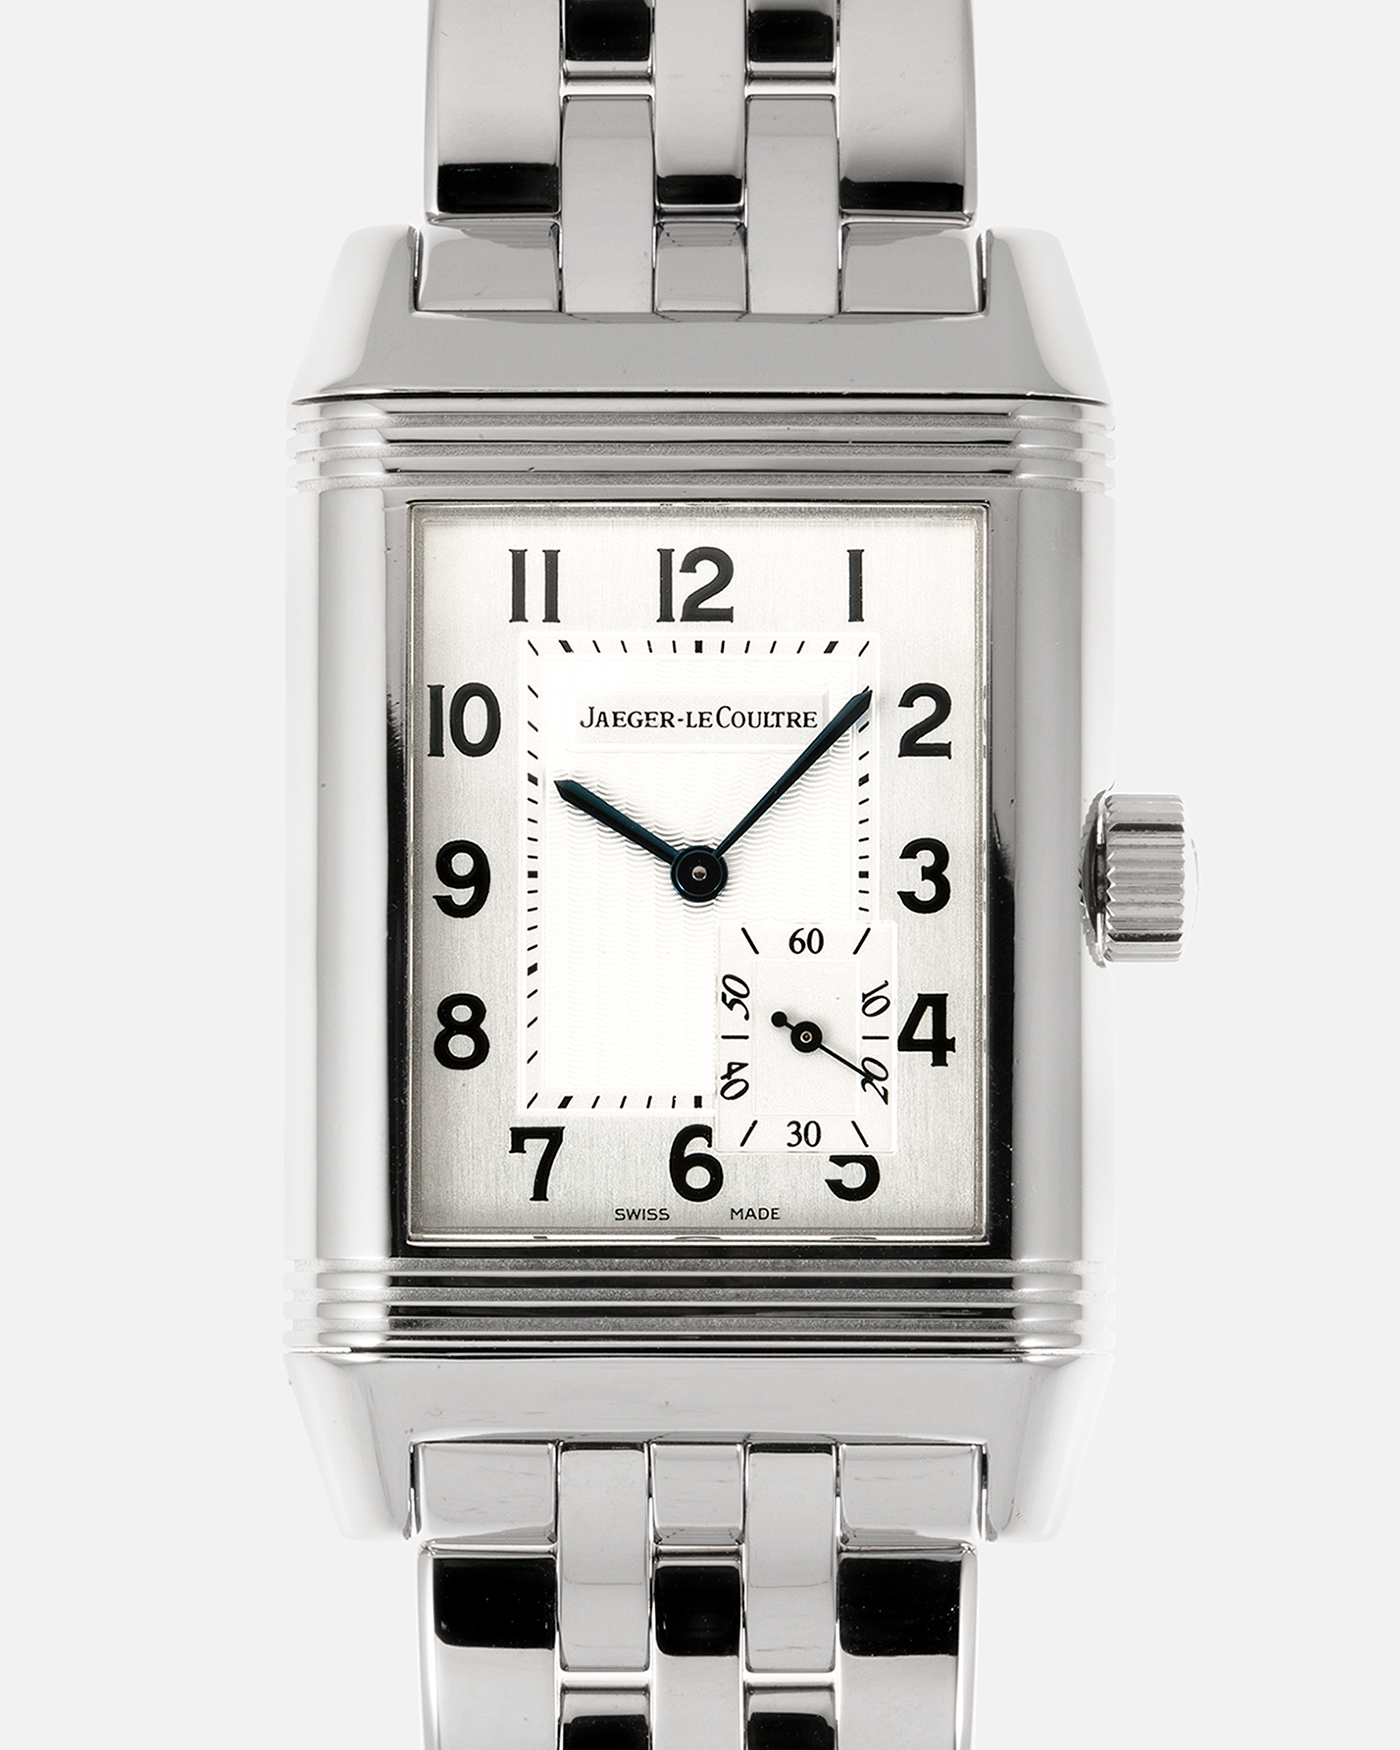 Brand: Jaeger LeCoultre Year: 2004 Model: Grande Reverso 8 Days Kanji Japan Edition, Limited to 50 pieces Reference: 240.8.14 Material: Stainless Steel Movement: JLC Cal. 874, Manual-Wind Case Diameter: 46.5mm x 29mm Bracelet/Strap: Jaeger LeCoultre Stainless Steel Bracelet with Signed Deployant Clasp